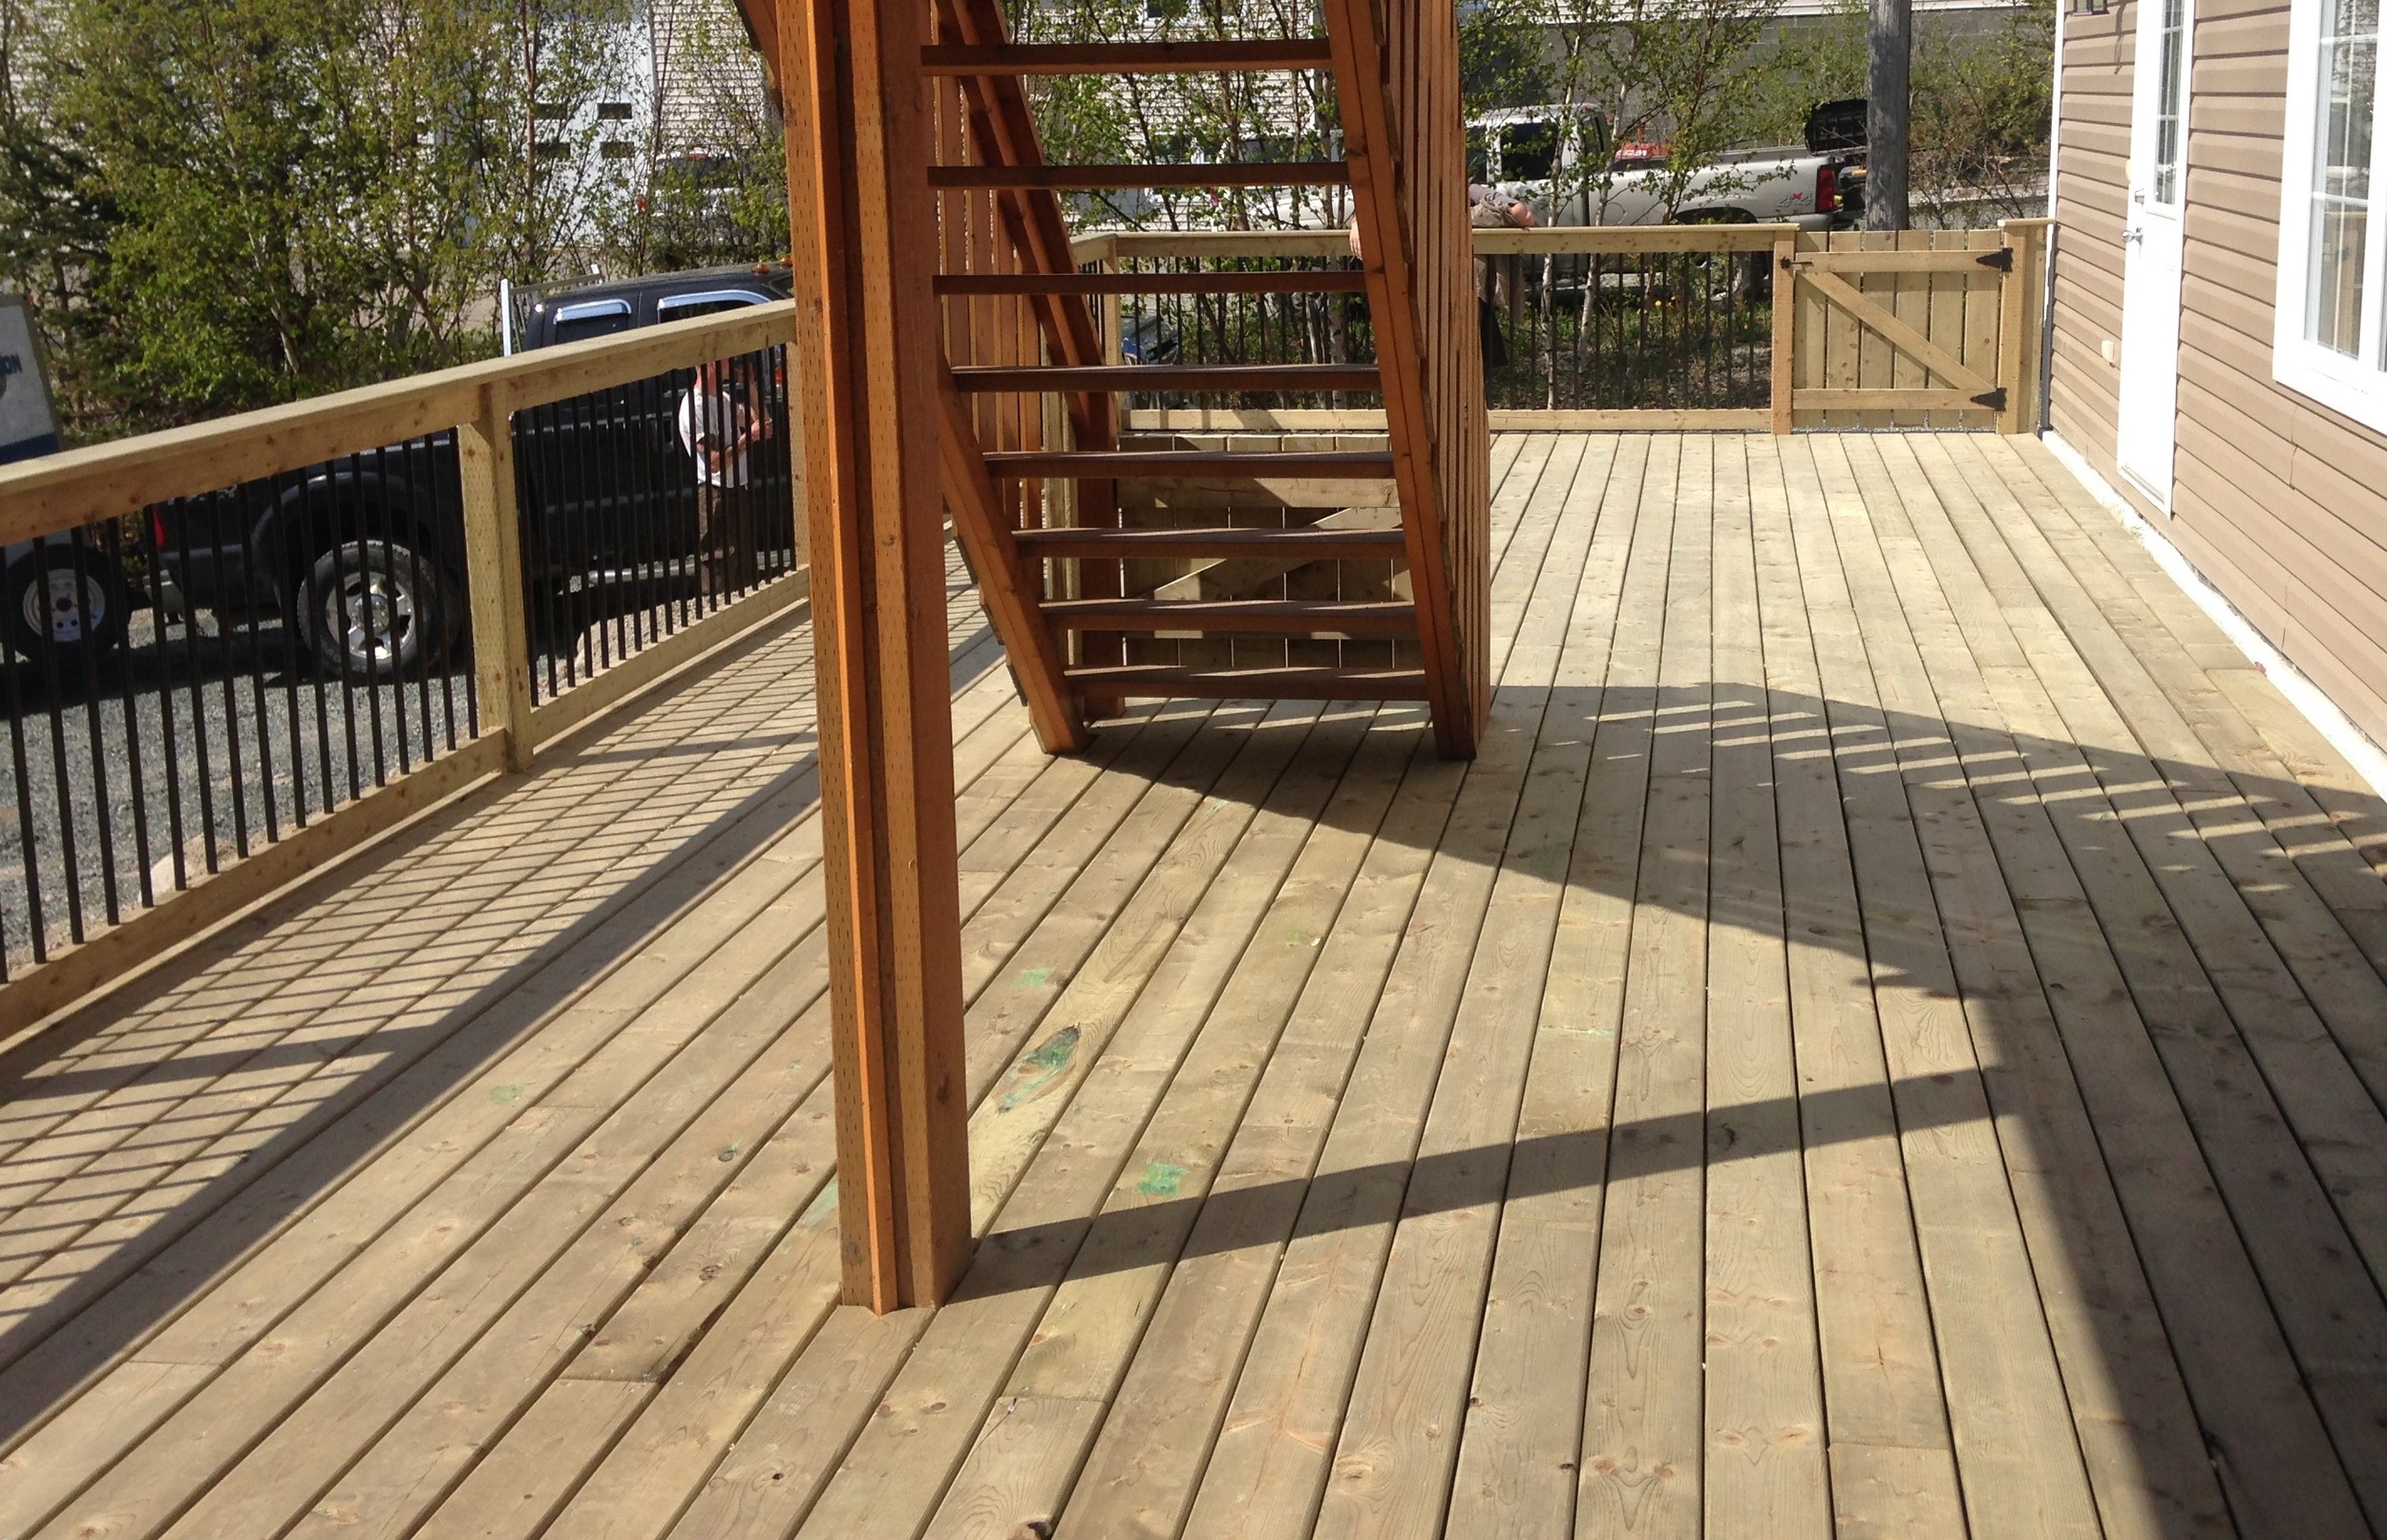 14' x 40' deck with wooden rails and rod iron spindles. 